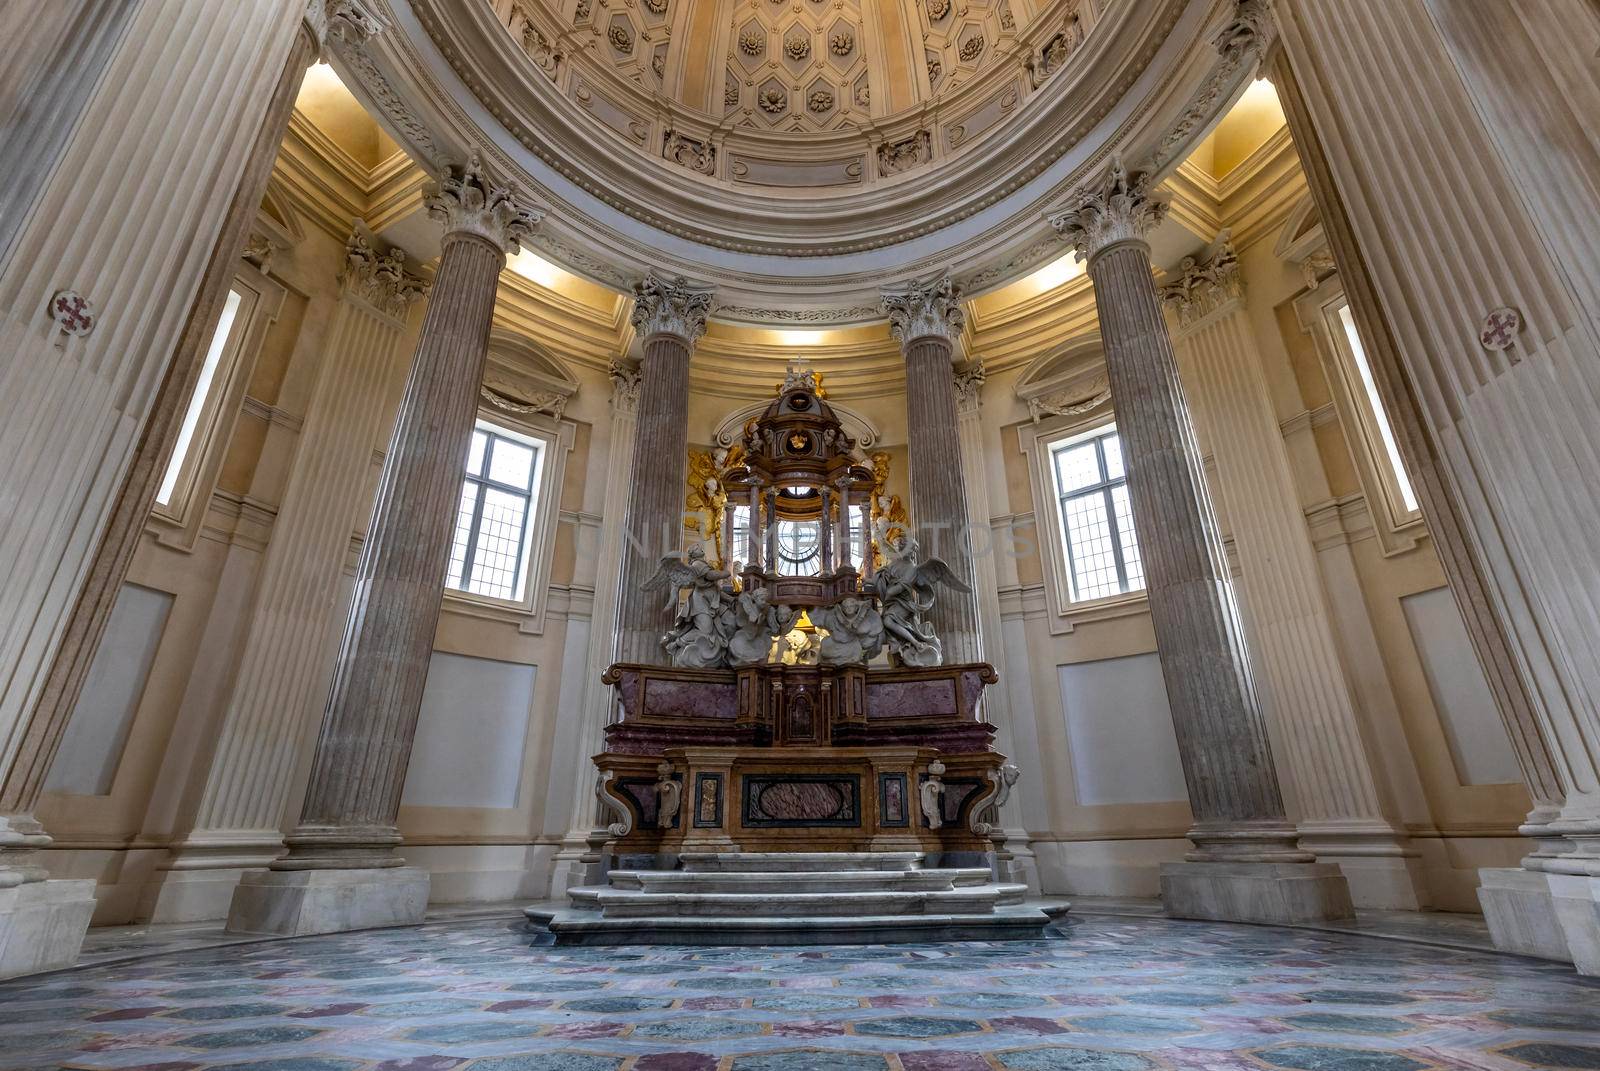 VENARIA REALE, ITALY - CIRCA MAY 2021: sacred catholic altar in Baroque style and cupola. Day light.